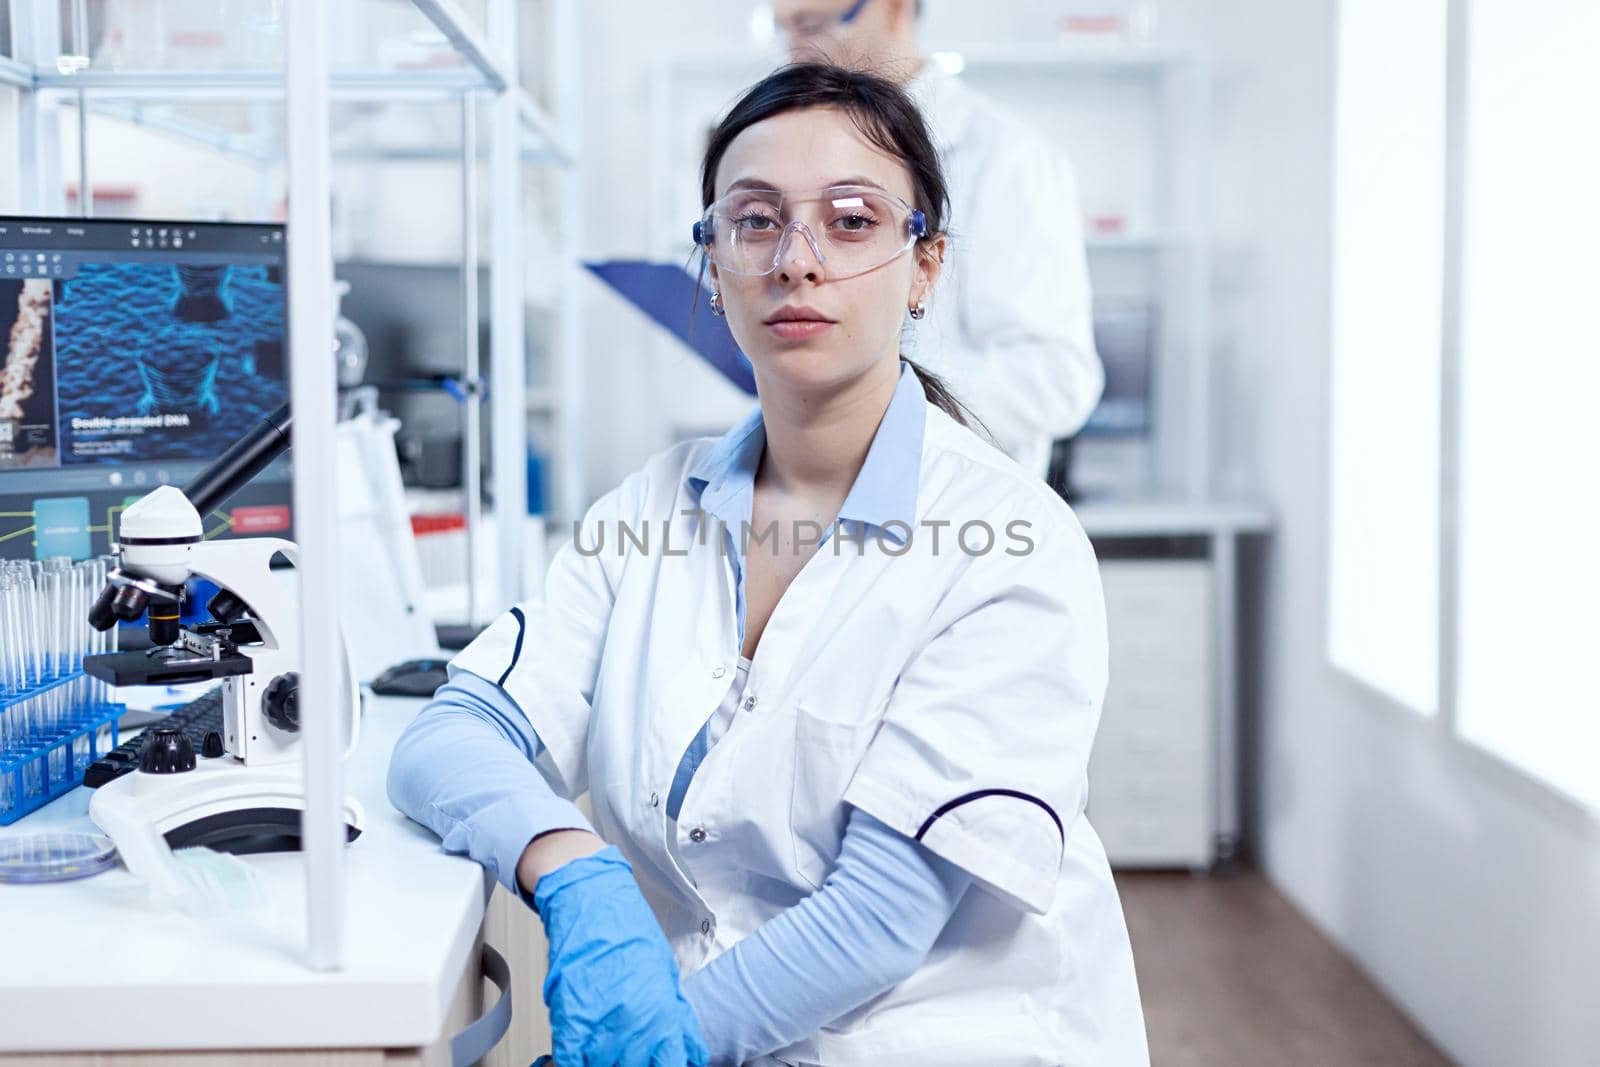 Portrait of successful scientist in microbiology laboratory wearing protection equipment. Chemist wearing lab coat using modern technology during scientific experiment in sterile environment.